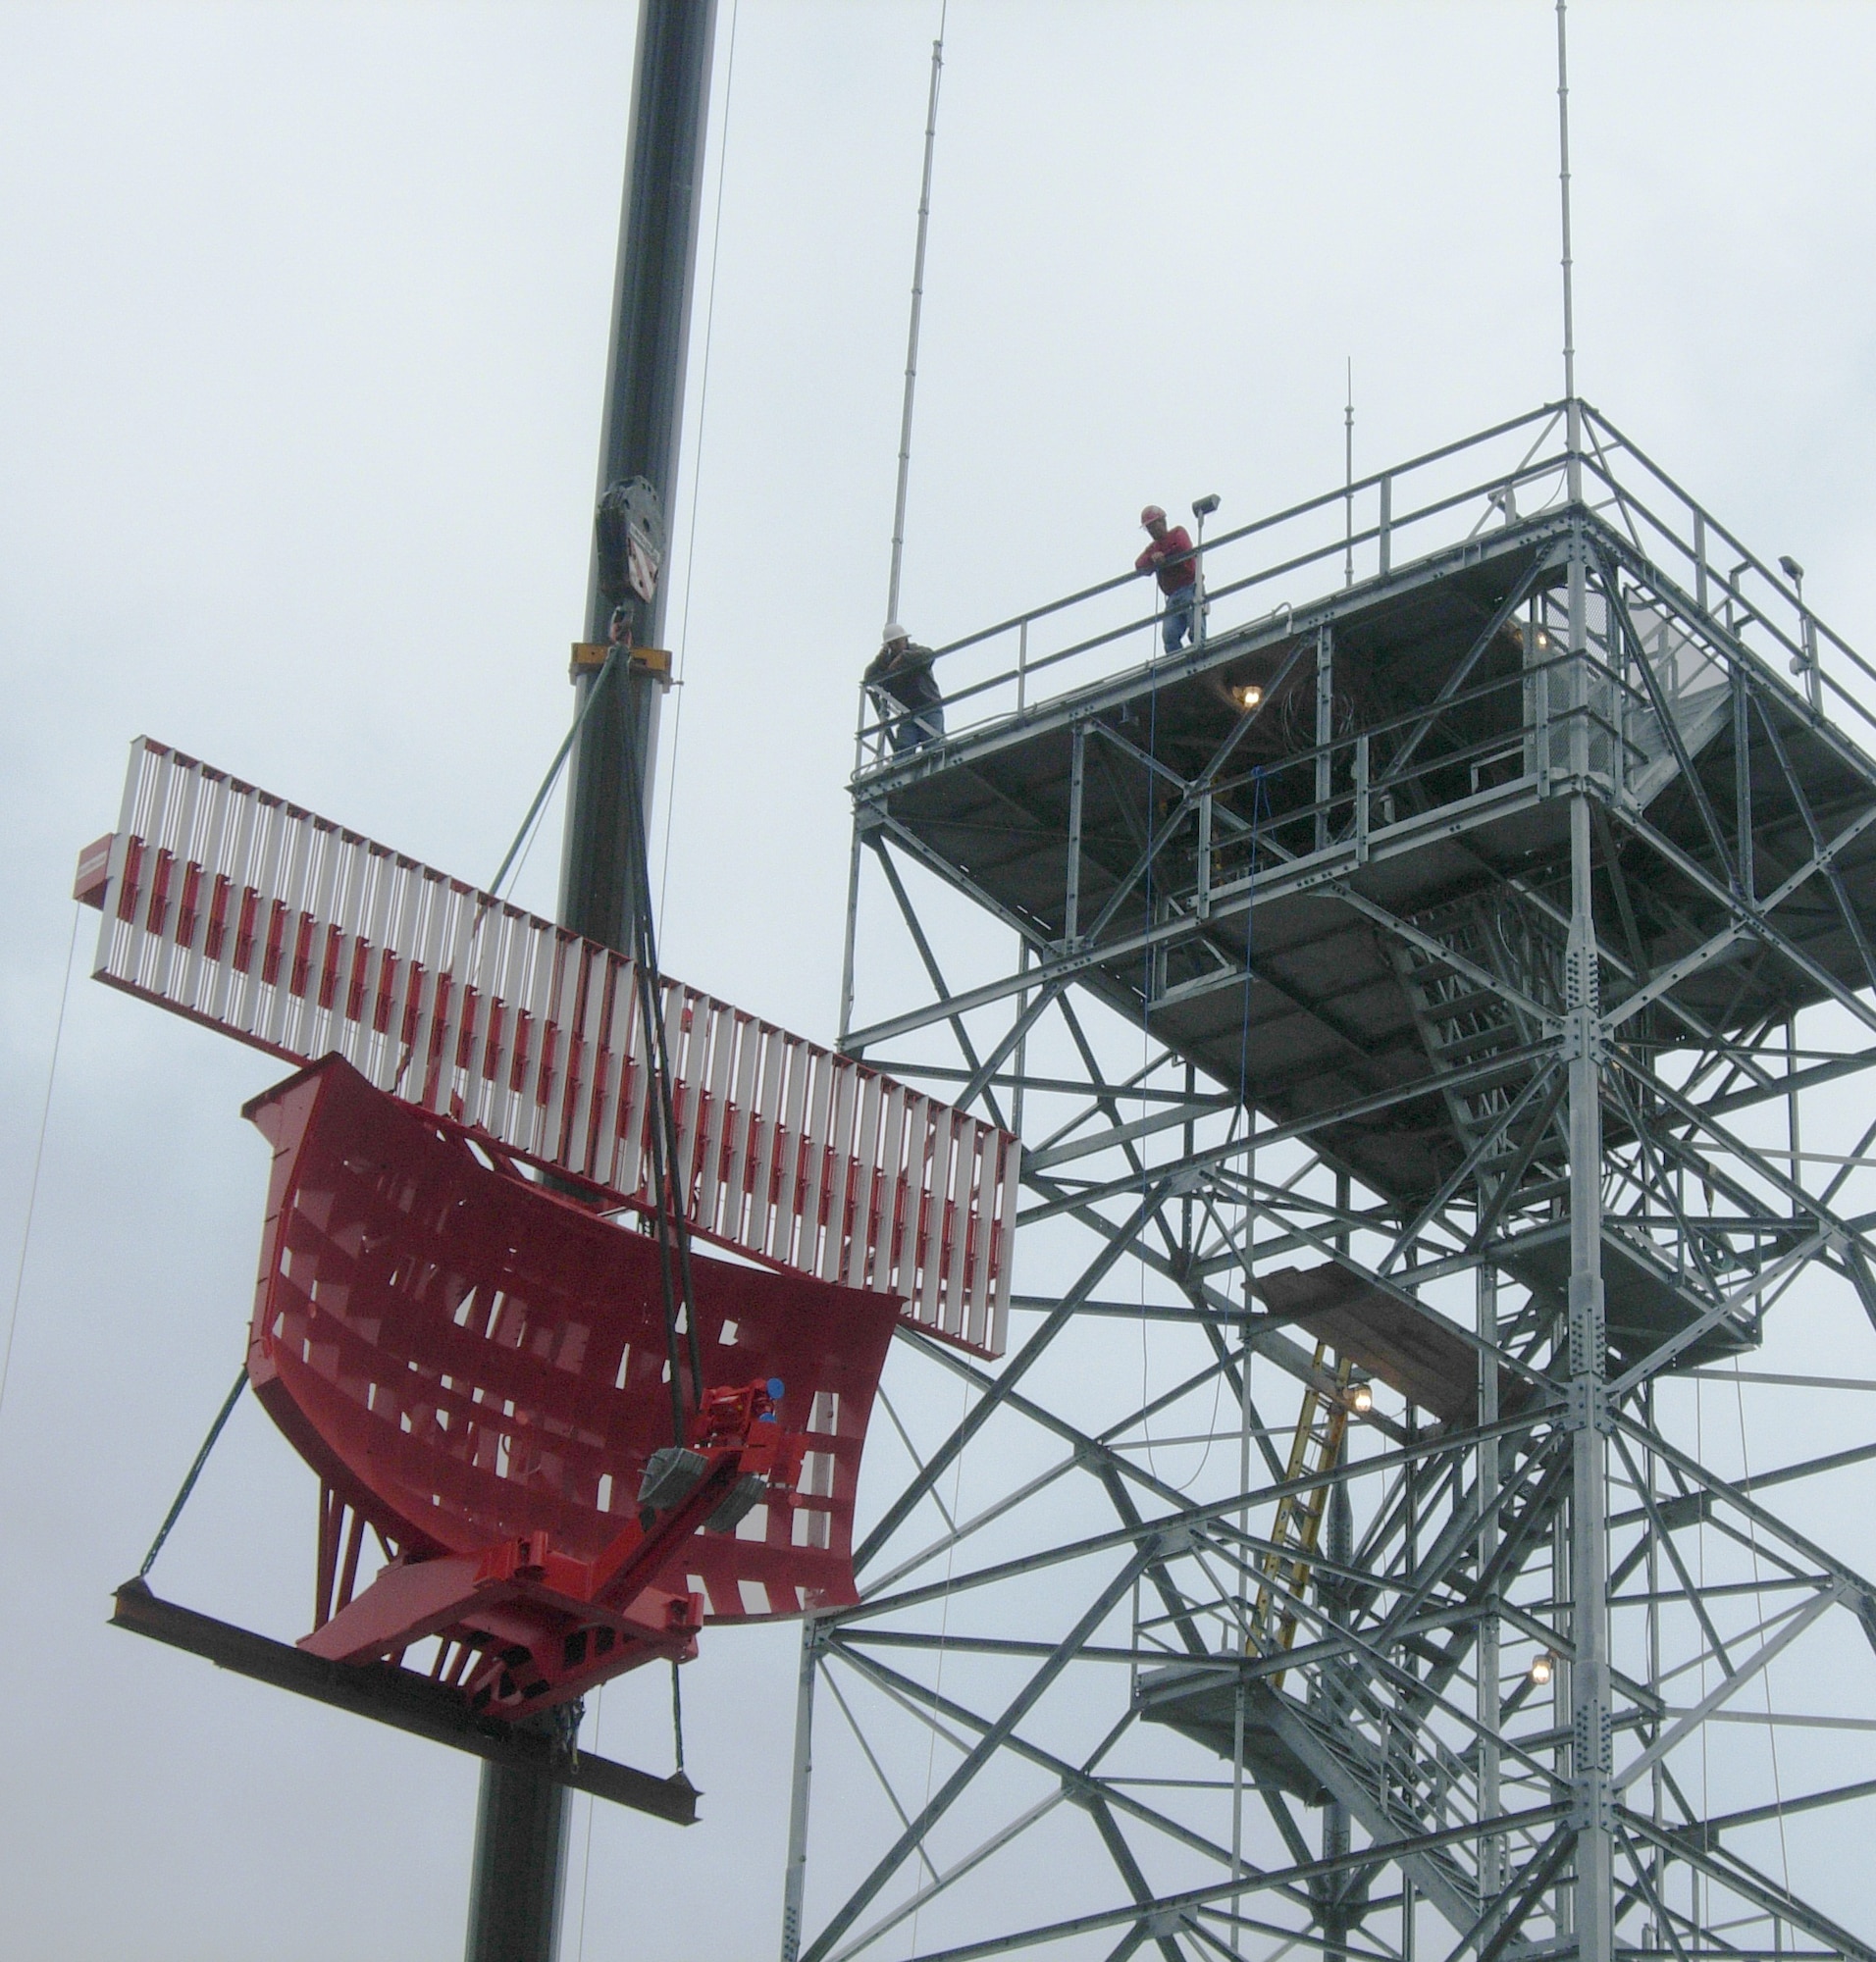 The 10,000-pound Digital Surveillance Radar Antenna, referred to as a “sail” by radar technicians, is located at the east end of taxiway B and will replace the aging analog radar system.